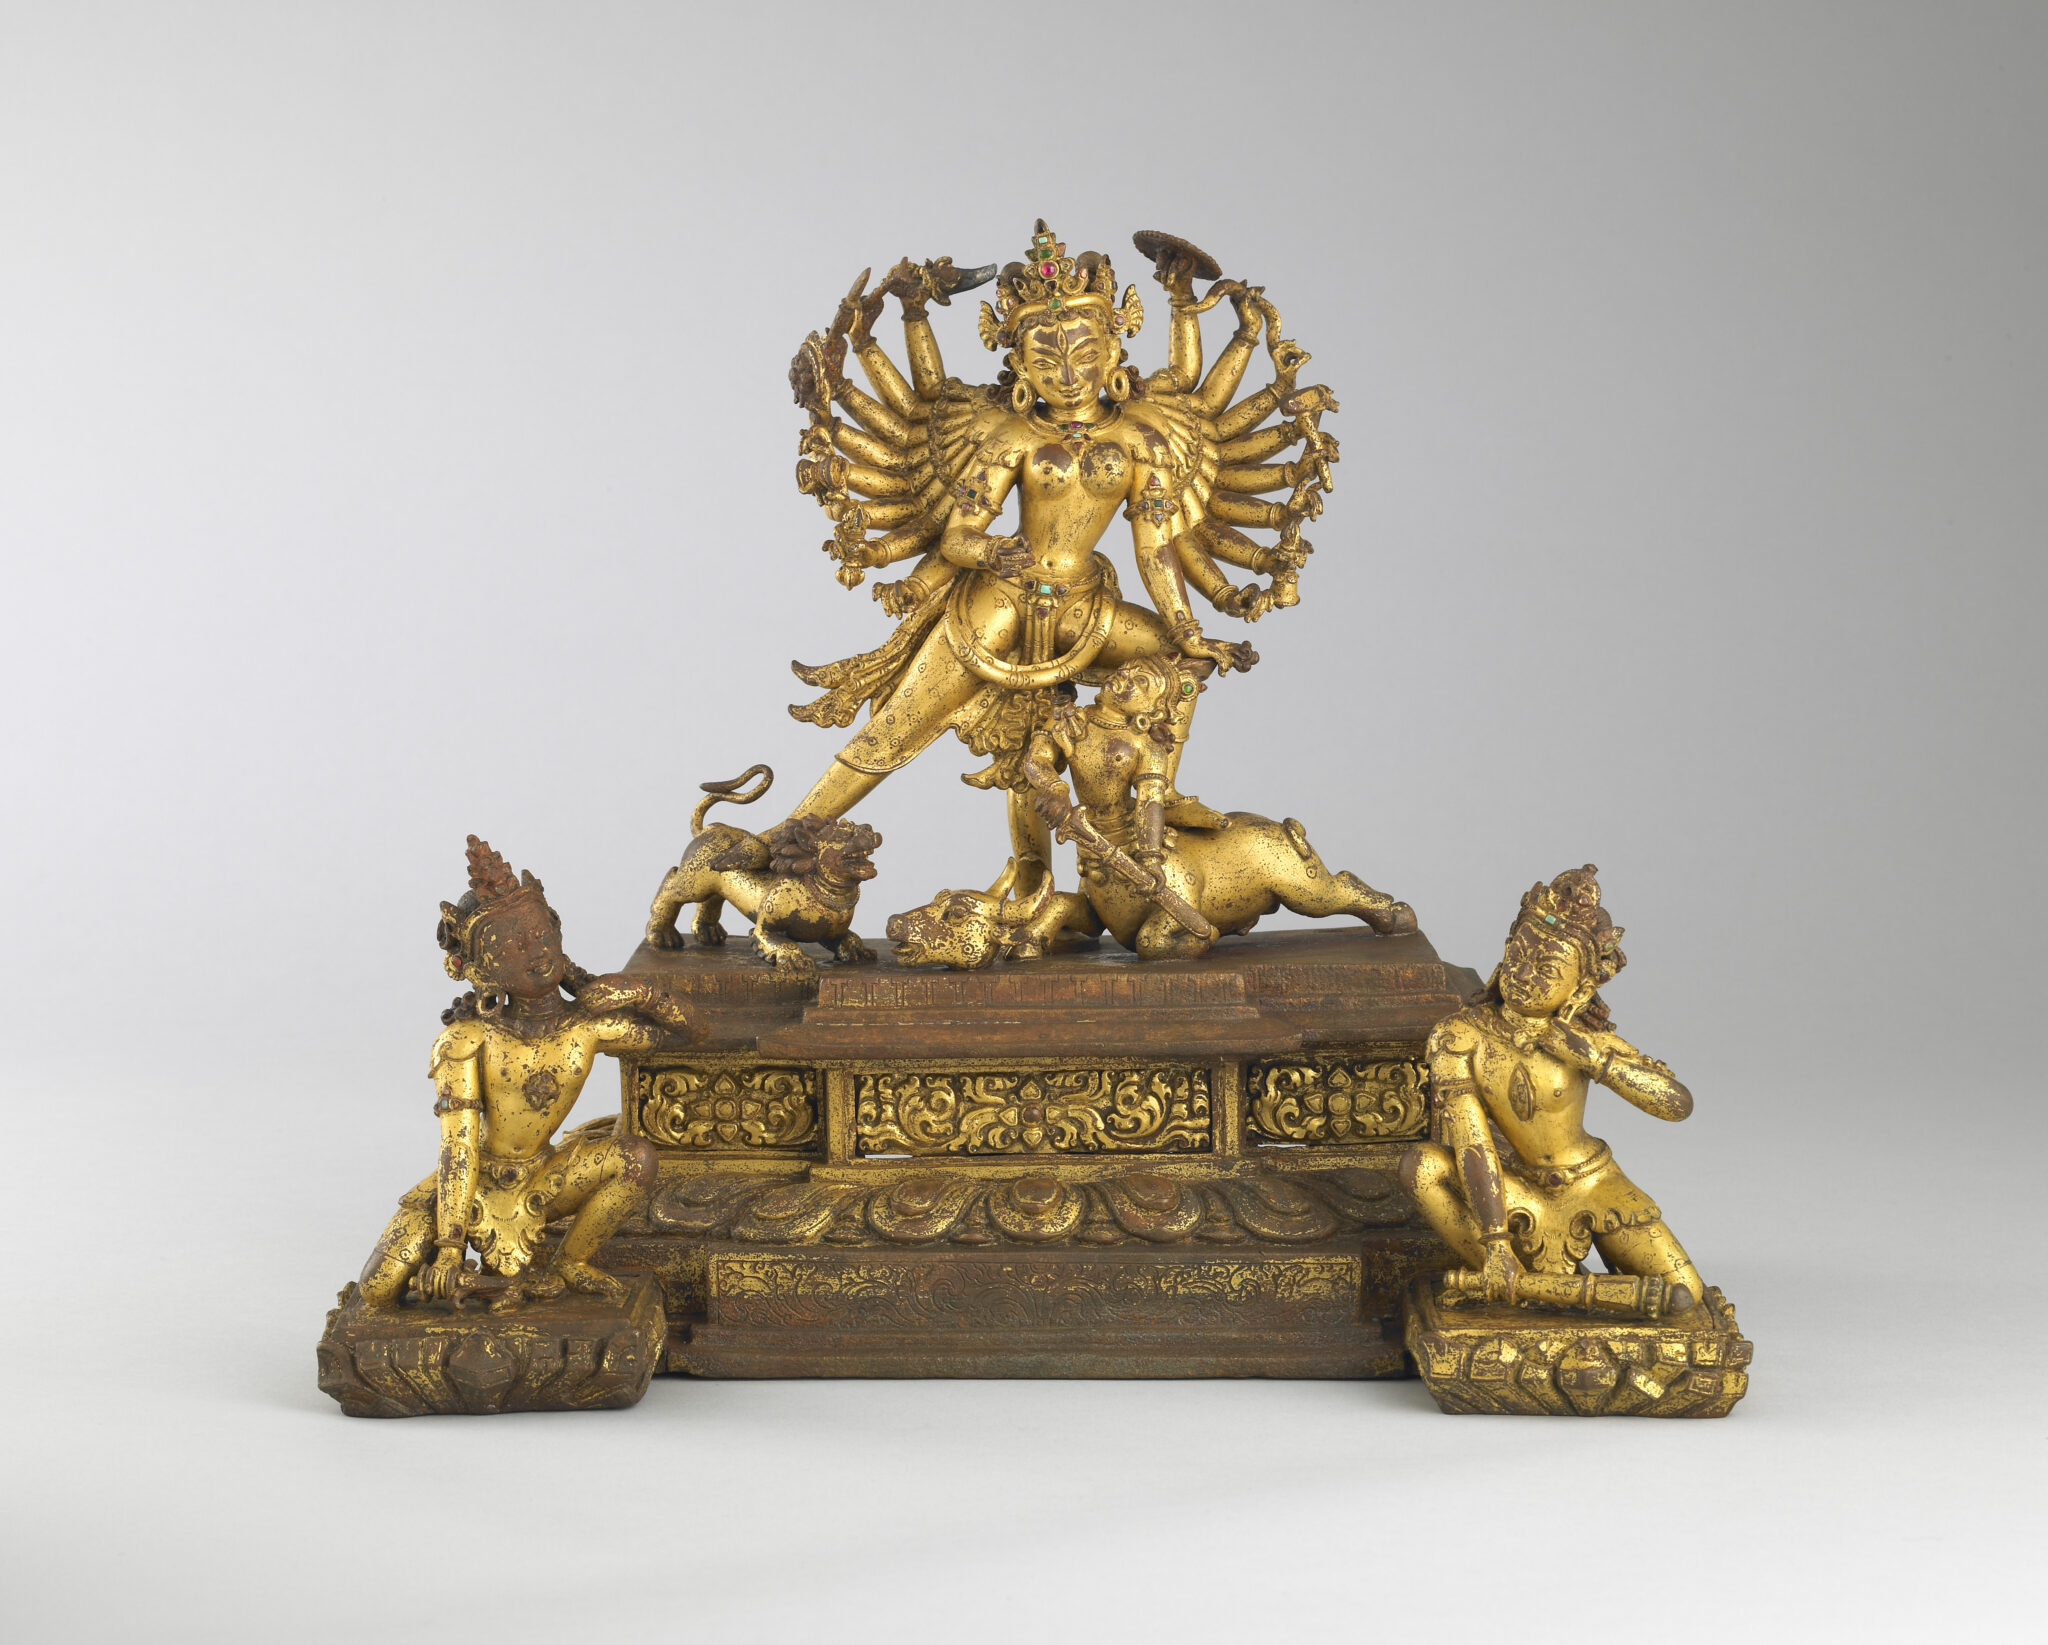 Sculpture depicting golden, many-armed goddess and animals atop wooden plinth flanked by kneeling attendants